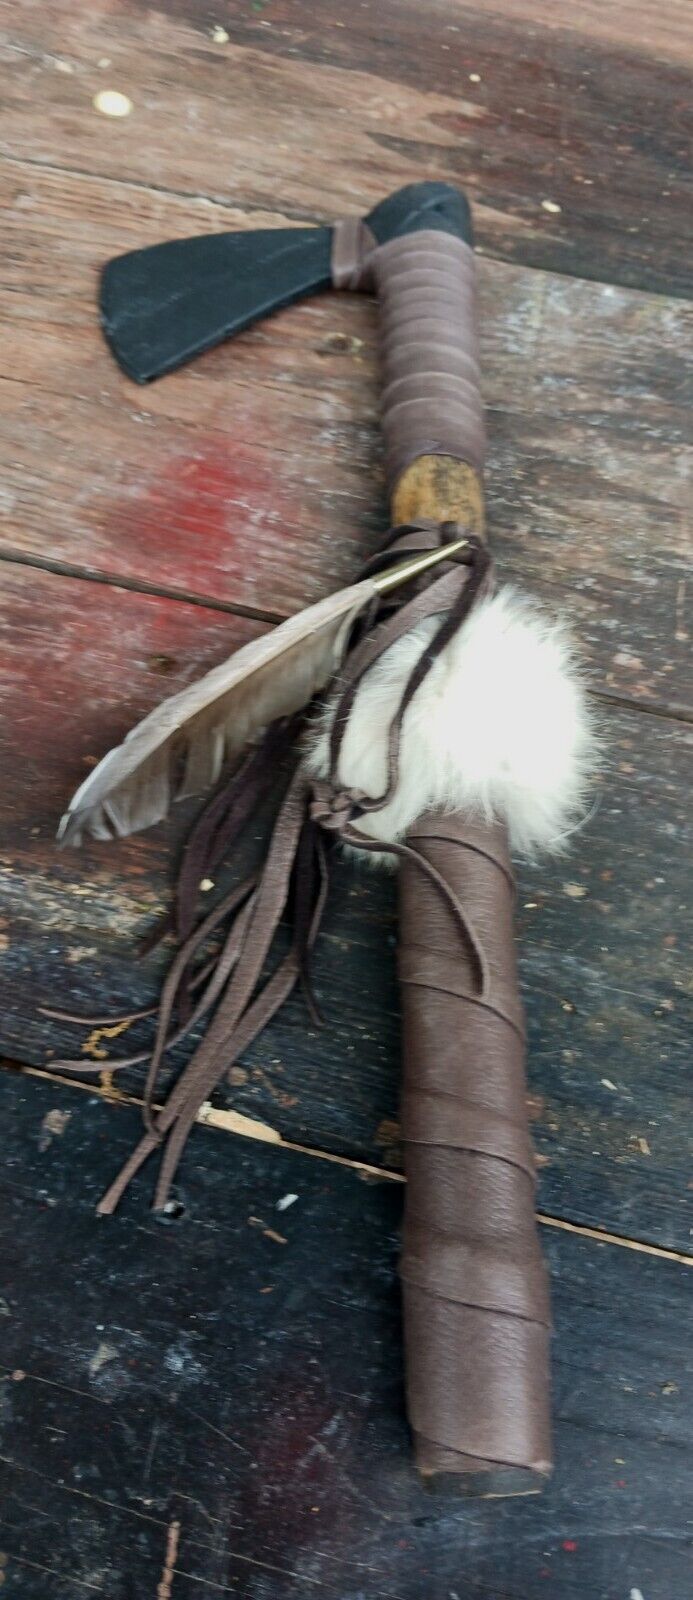 **AWESOME  NATIVE AMERICAN  HAND MADE TOMAHAWK SOUVENIR TOY 1950s NICE**